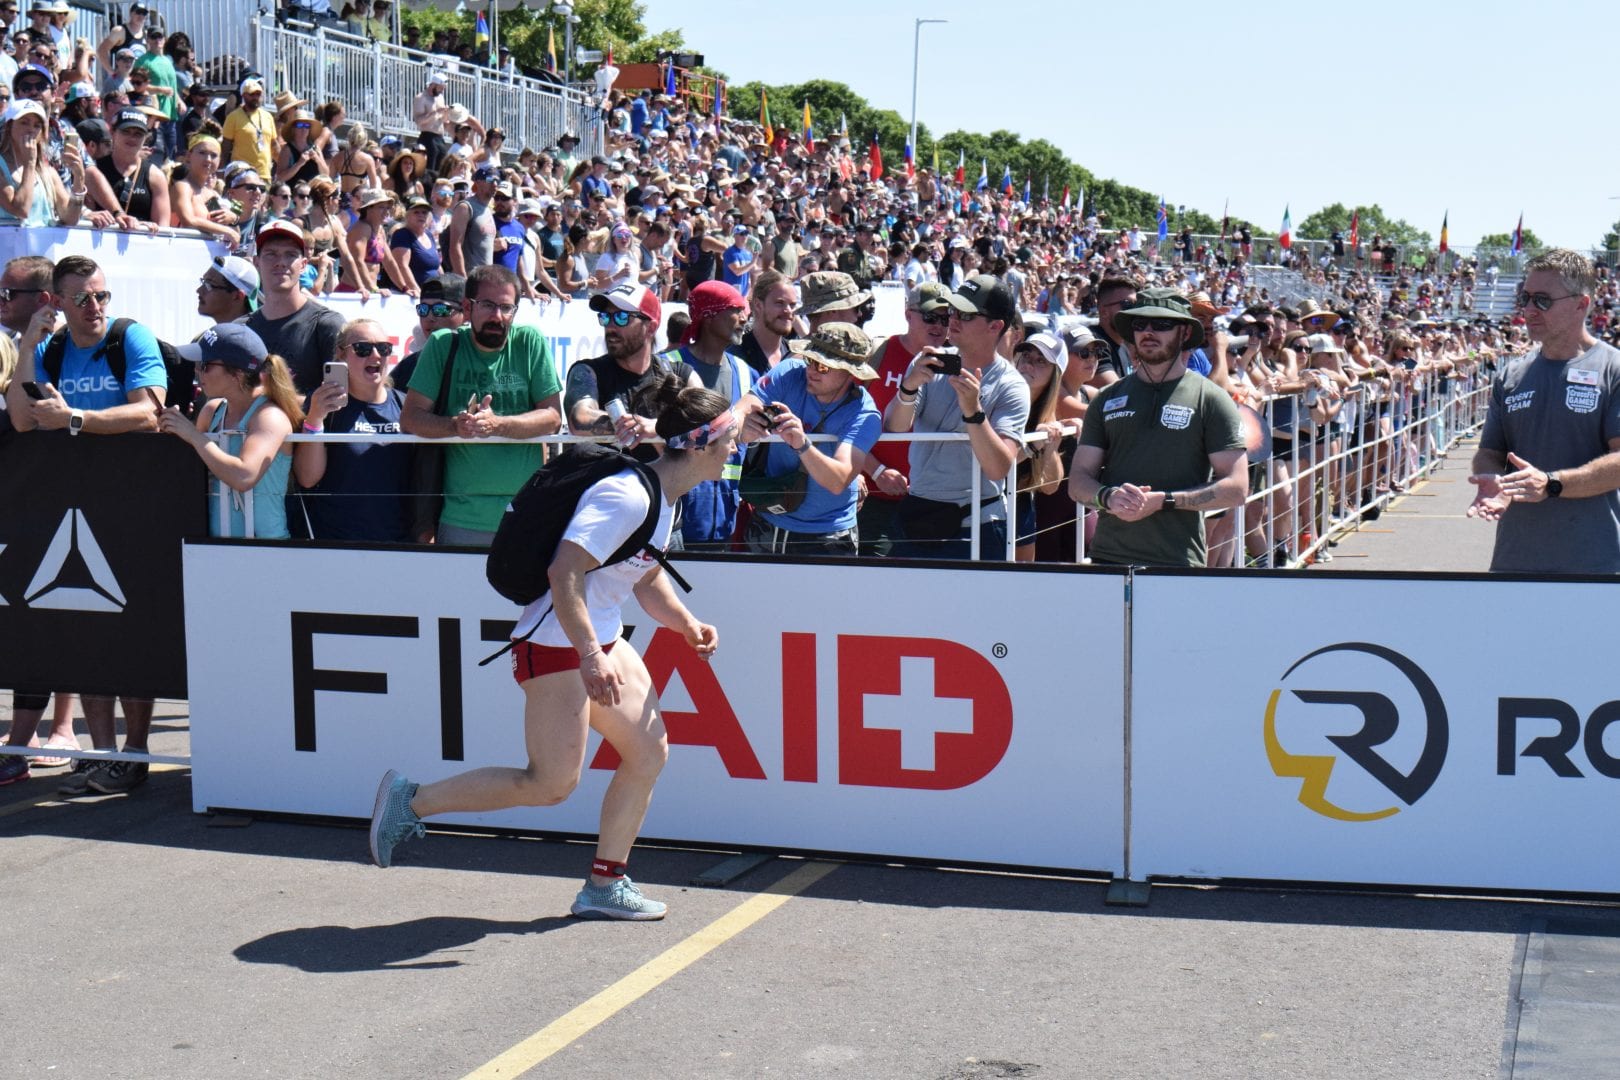 Kari Pearce completes the Ruck Run event at the 2019 CrossFit Games